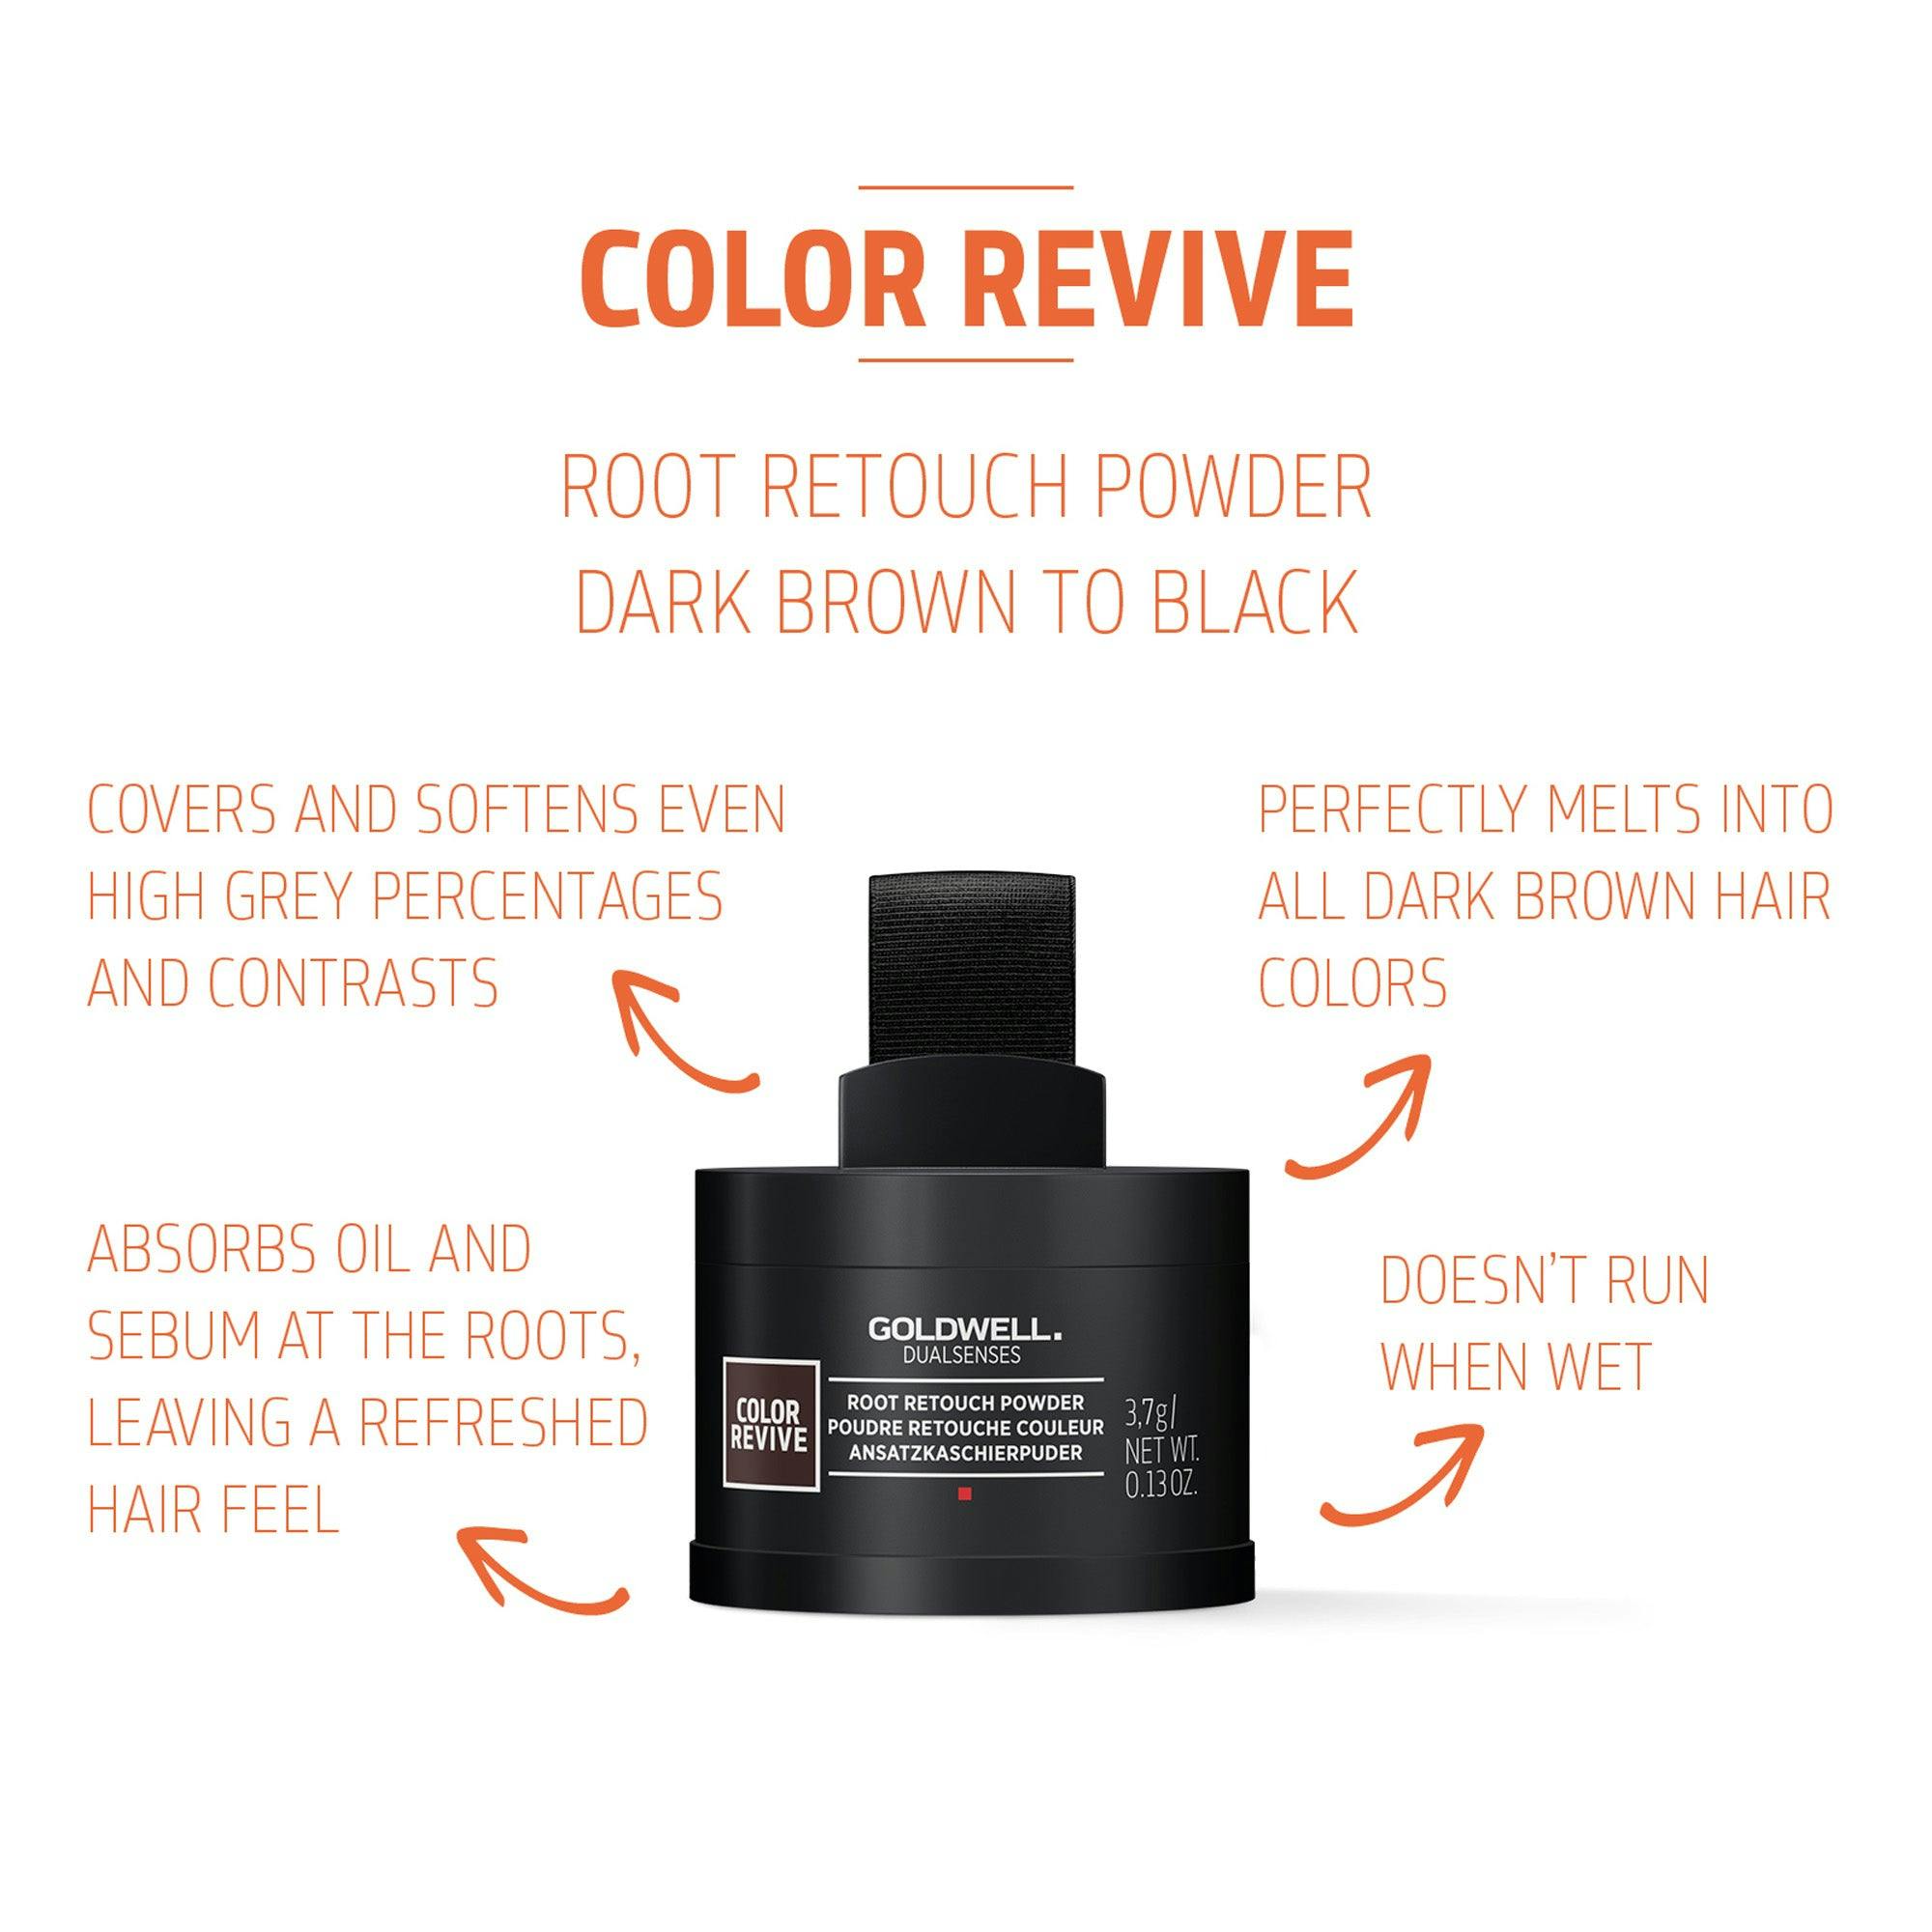 Goldwell Dualsenses Color Revive Root Retouch Powder - Dark Brown to Black 3.7g